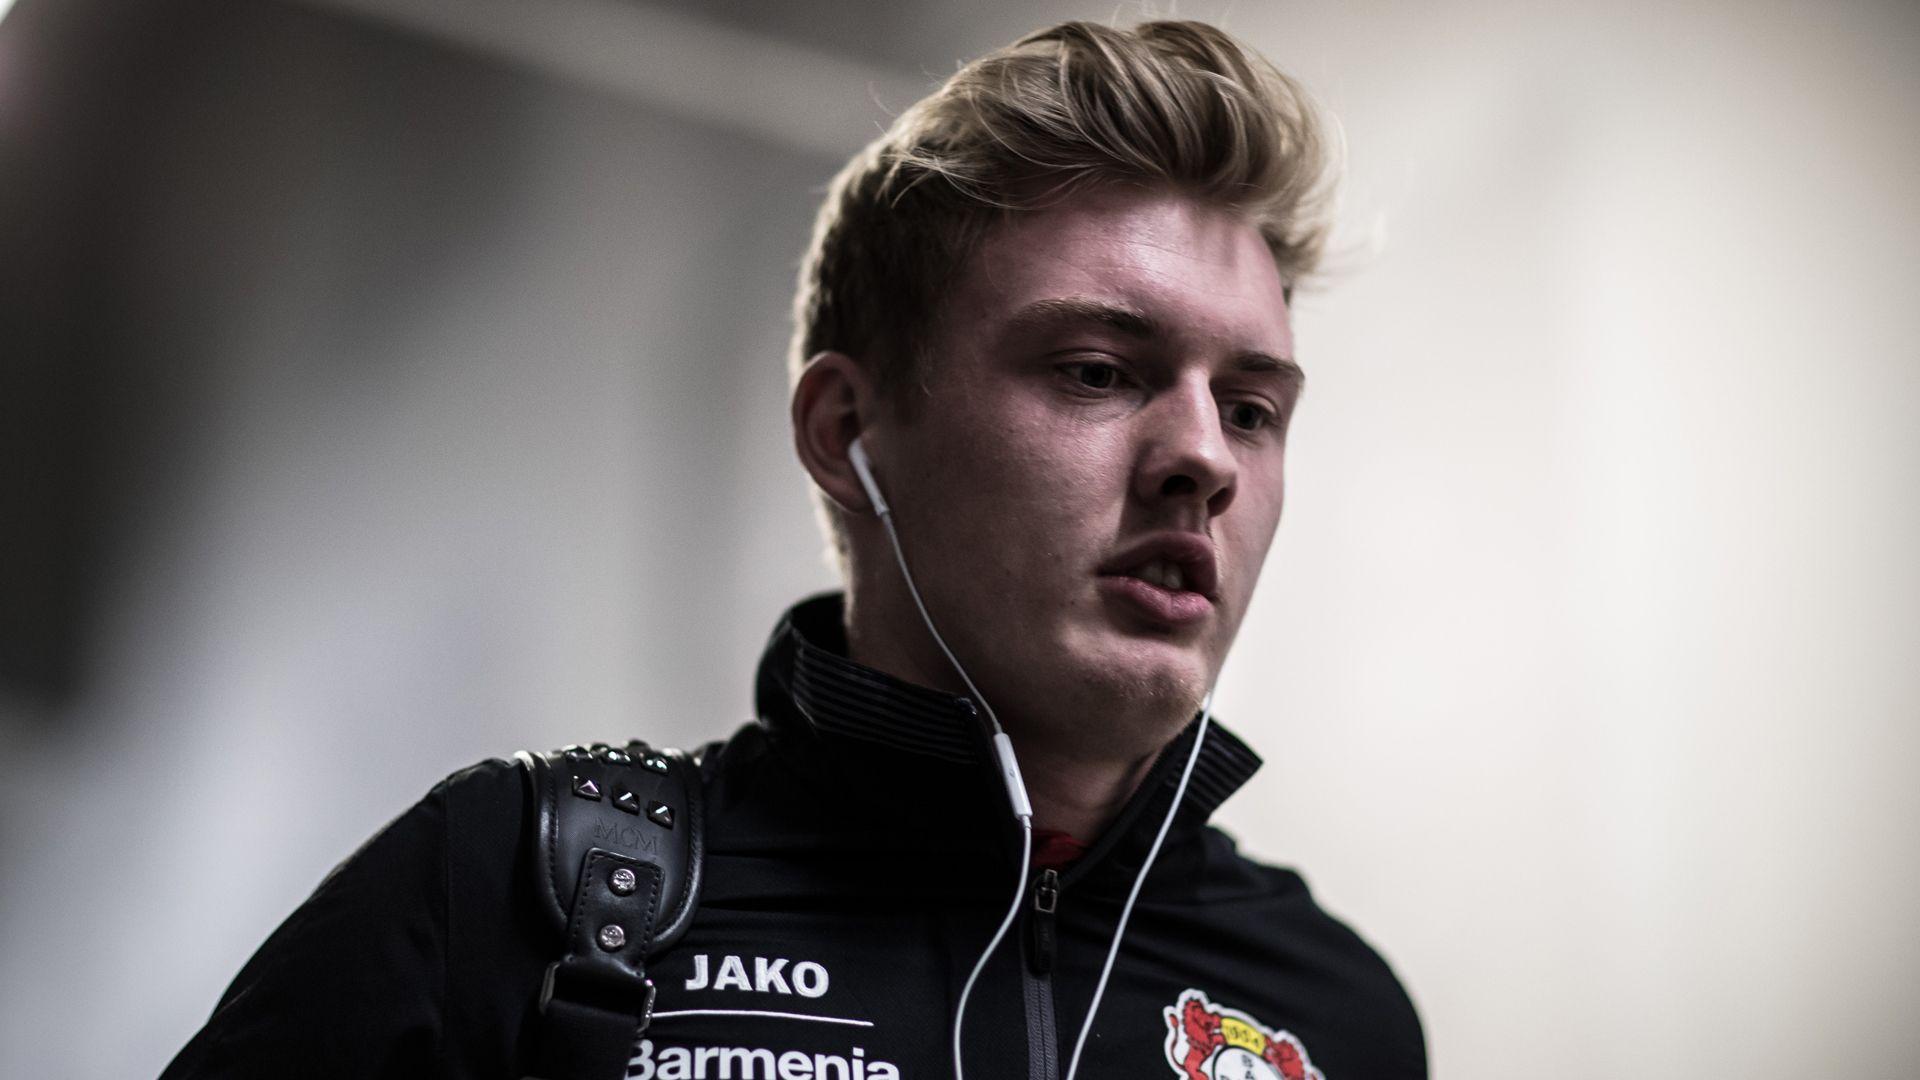 Bundesliga. Brandt rules out move, saying he owes a debt to Leverkusen